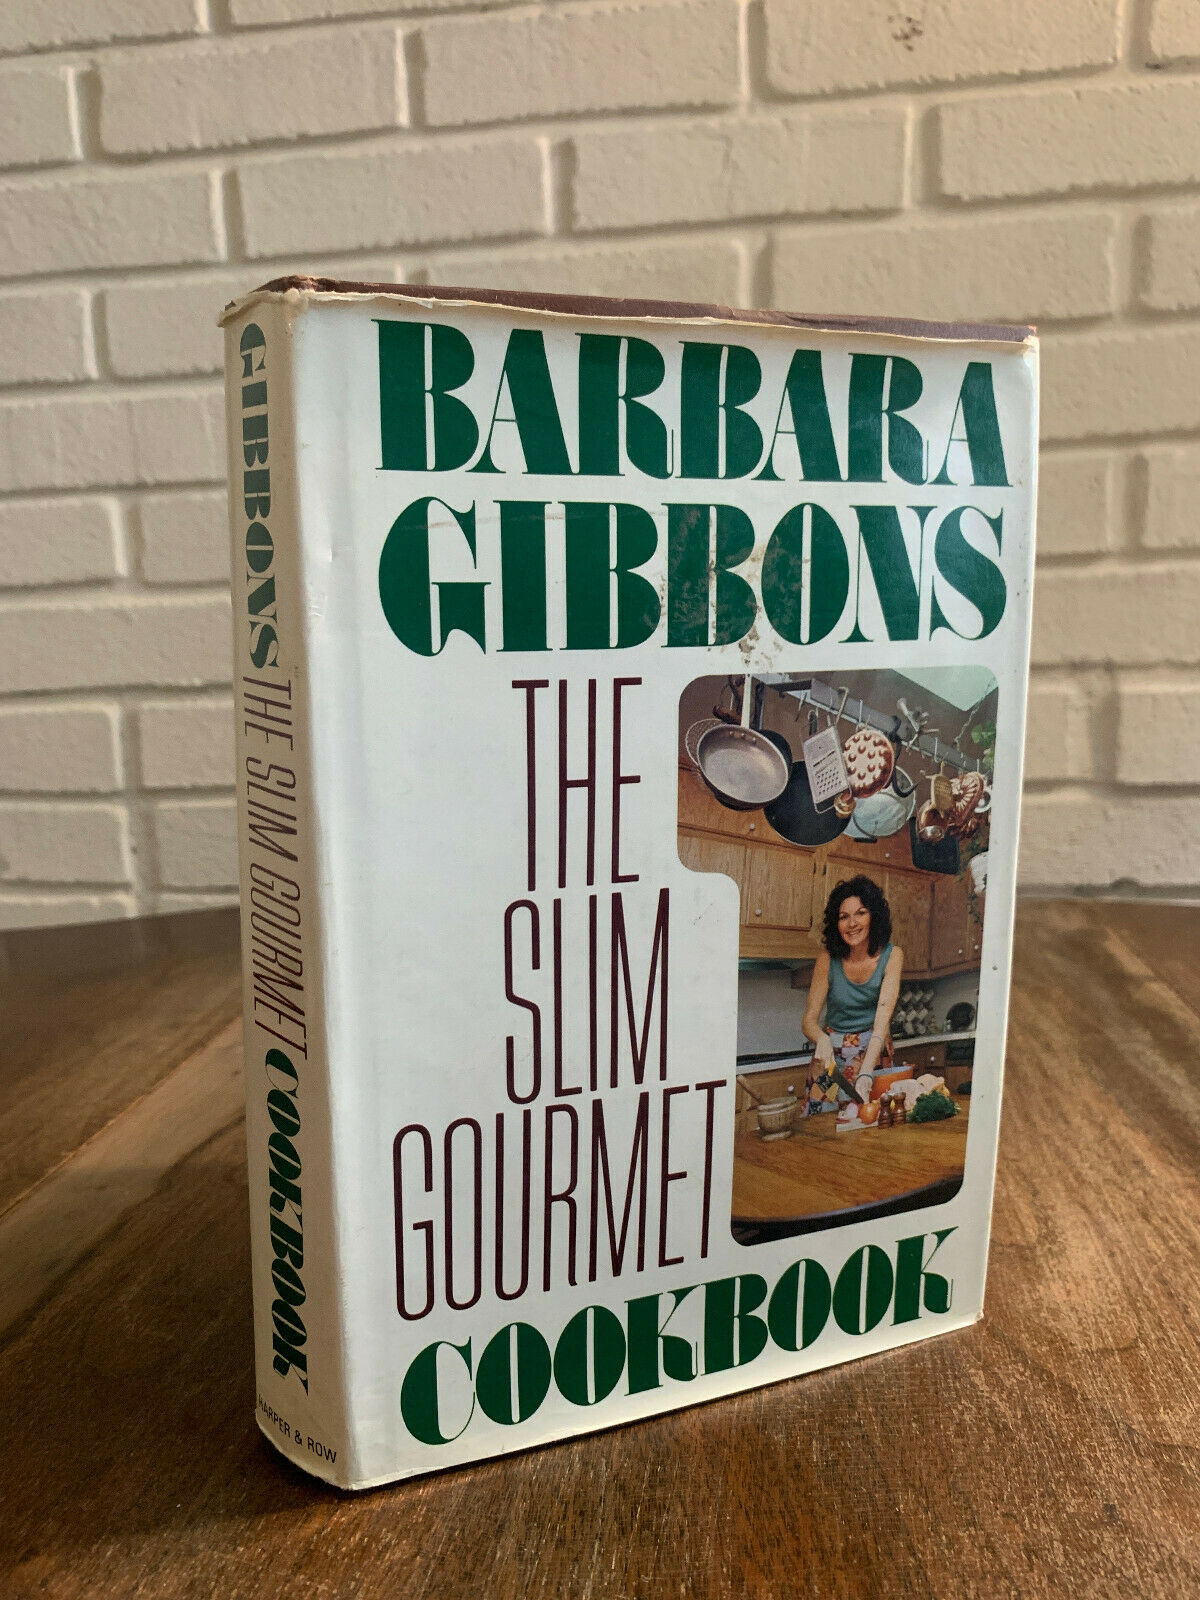 The Slim Gourmet Cookbook by Gibbons, Barbara (1976) (Q6)